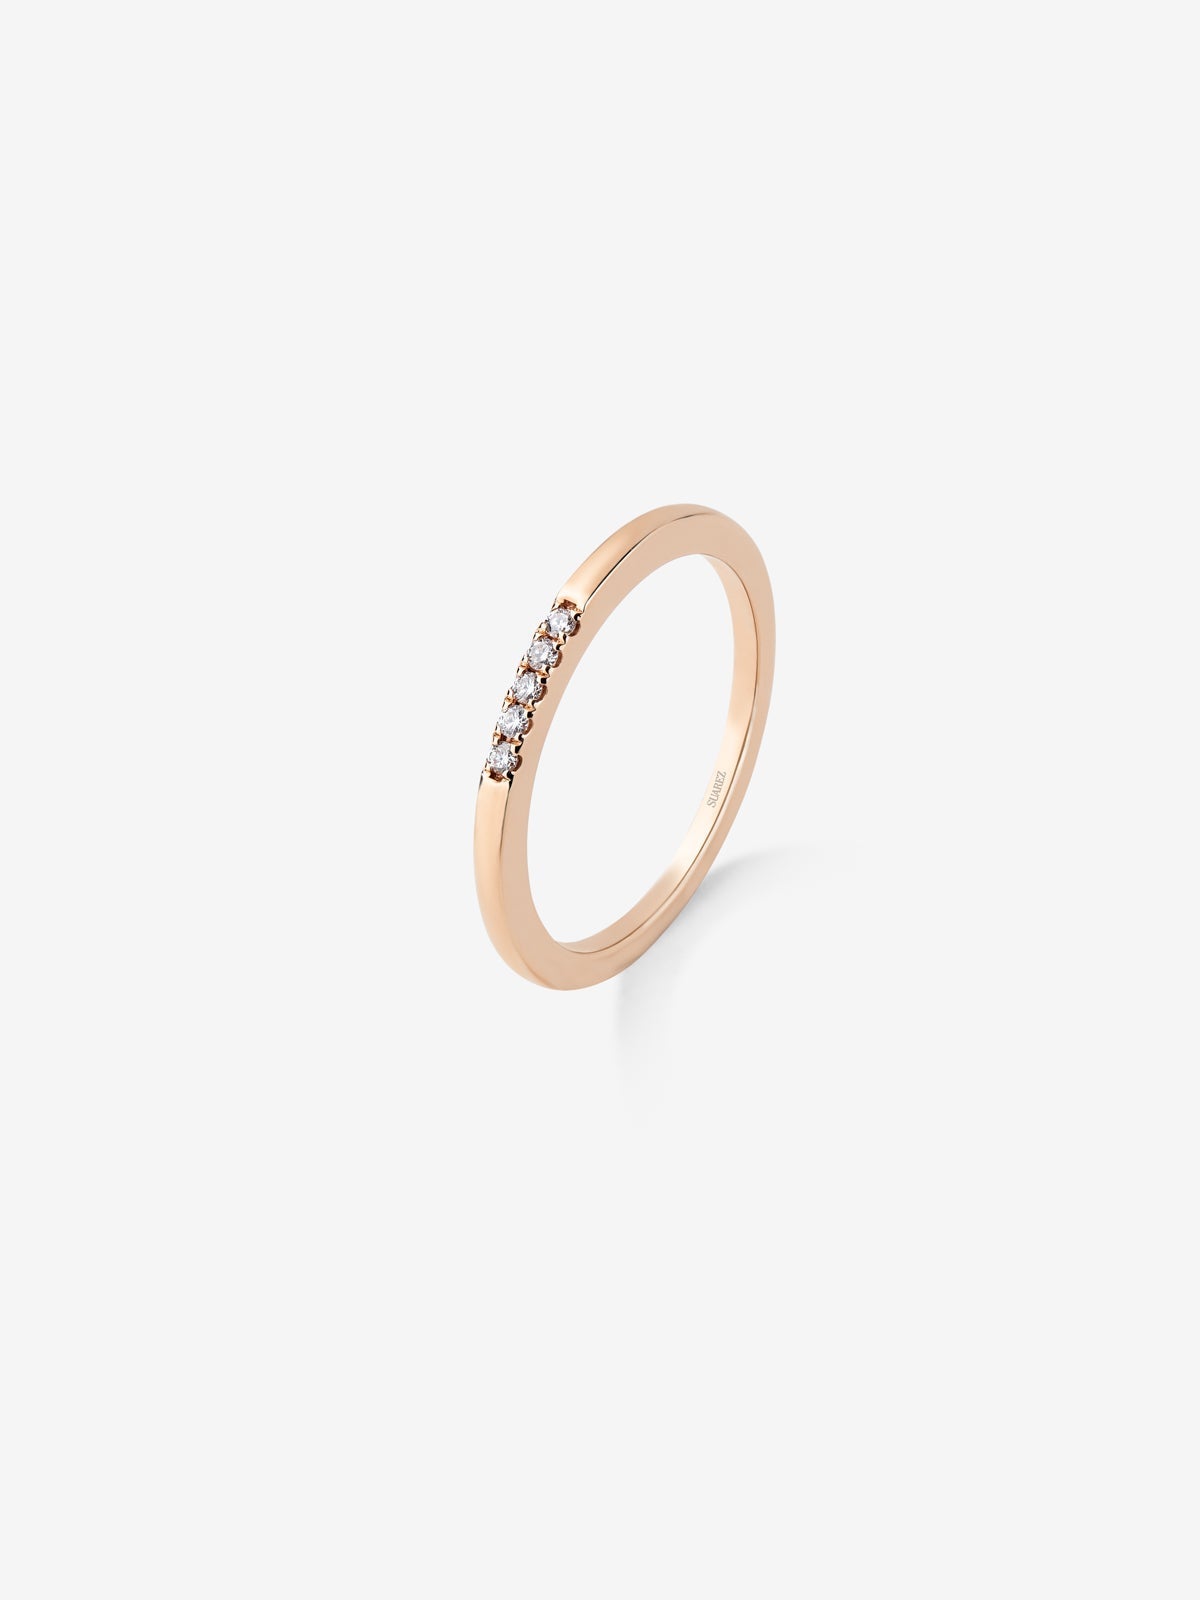 18K rose gold ring with 5 brilliant-cut diamonds with a total of 0.05 cts